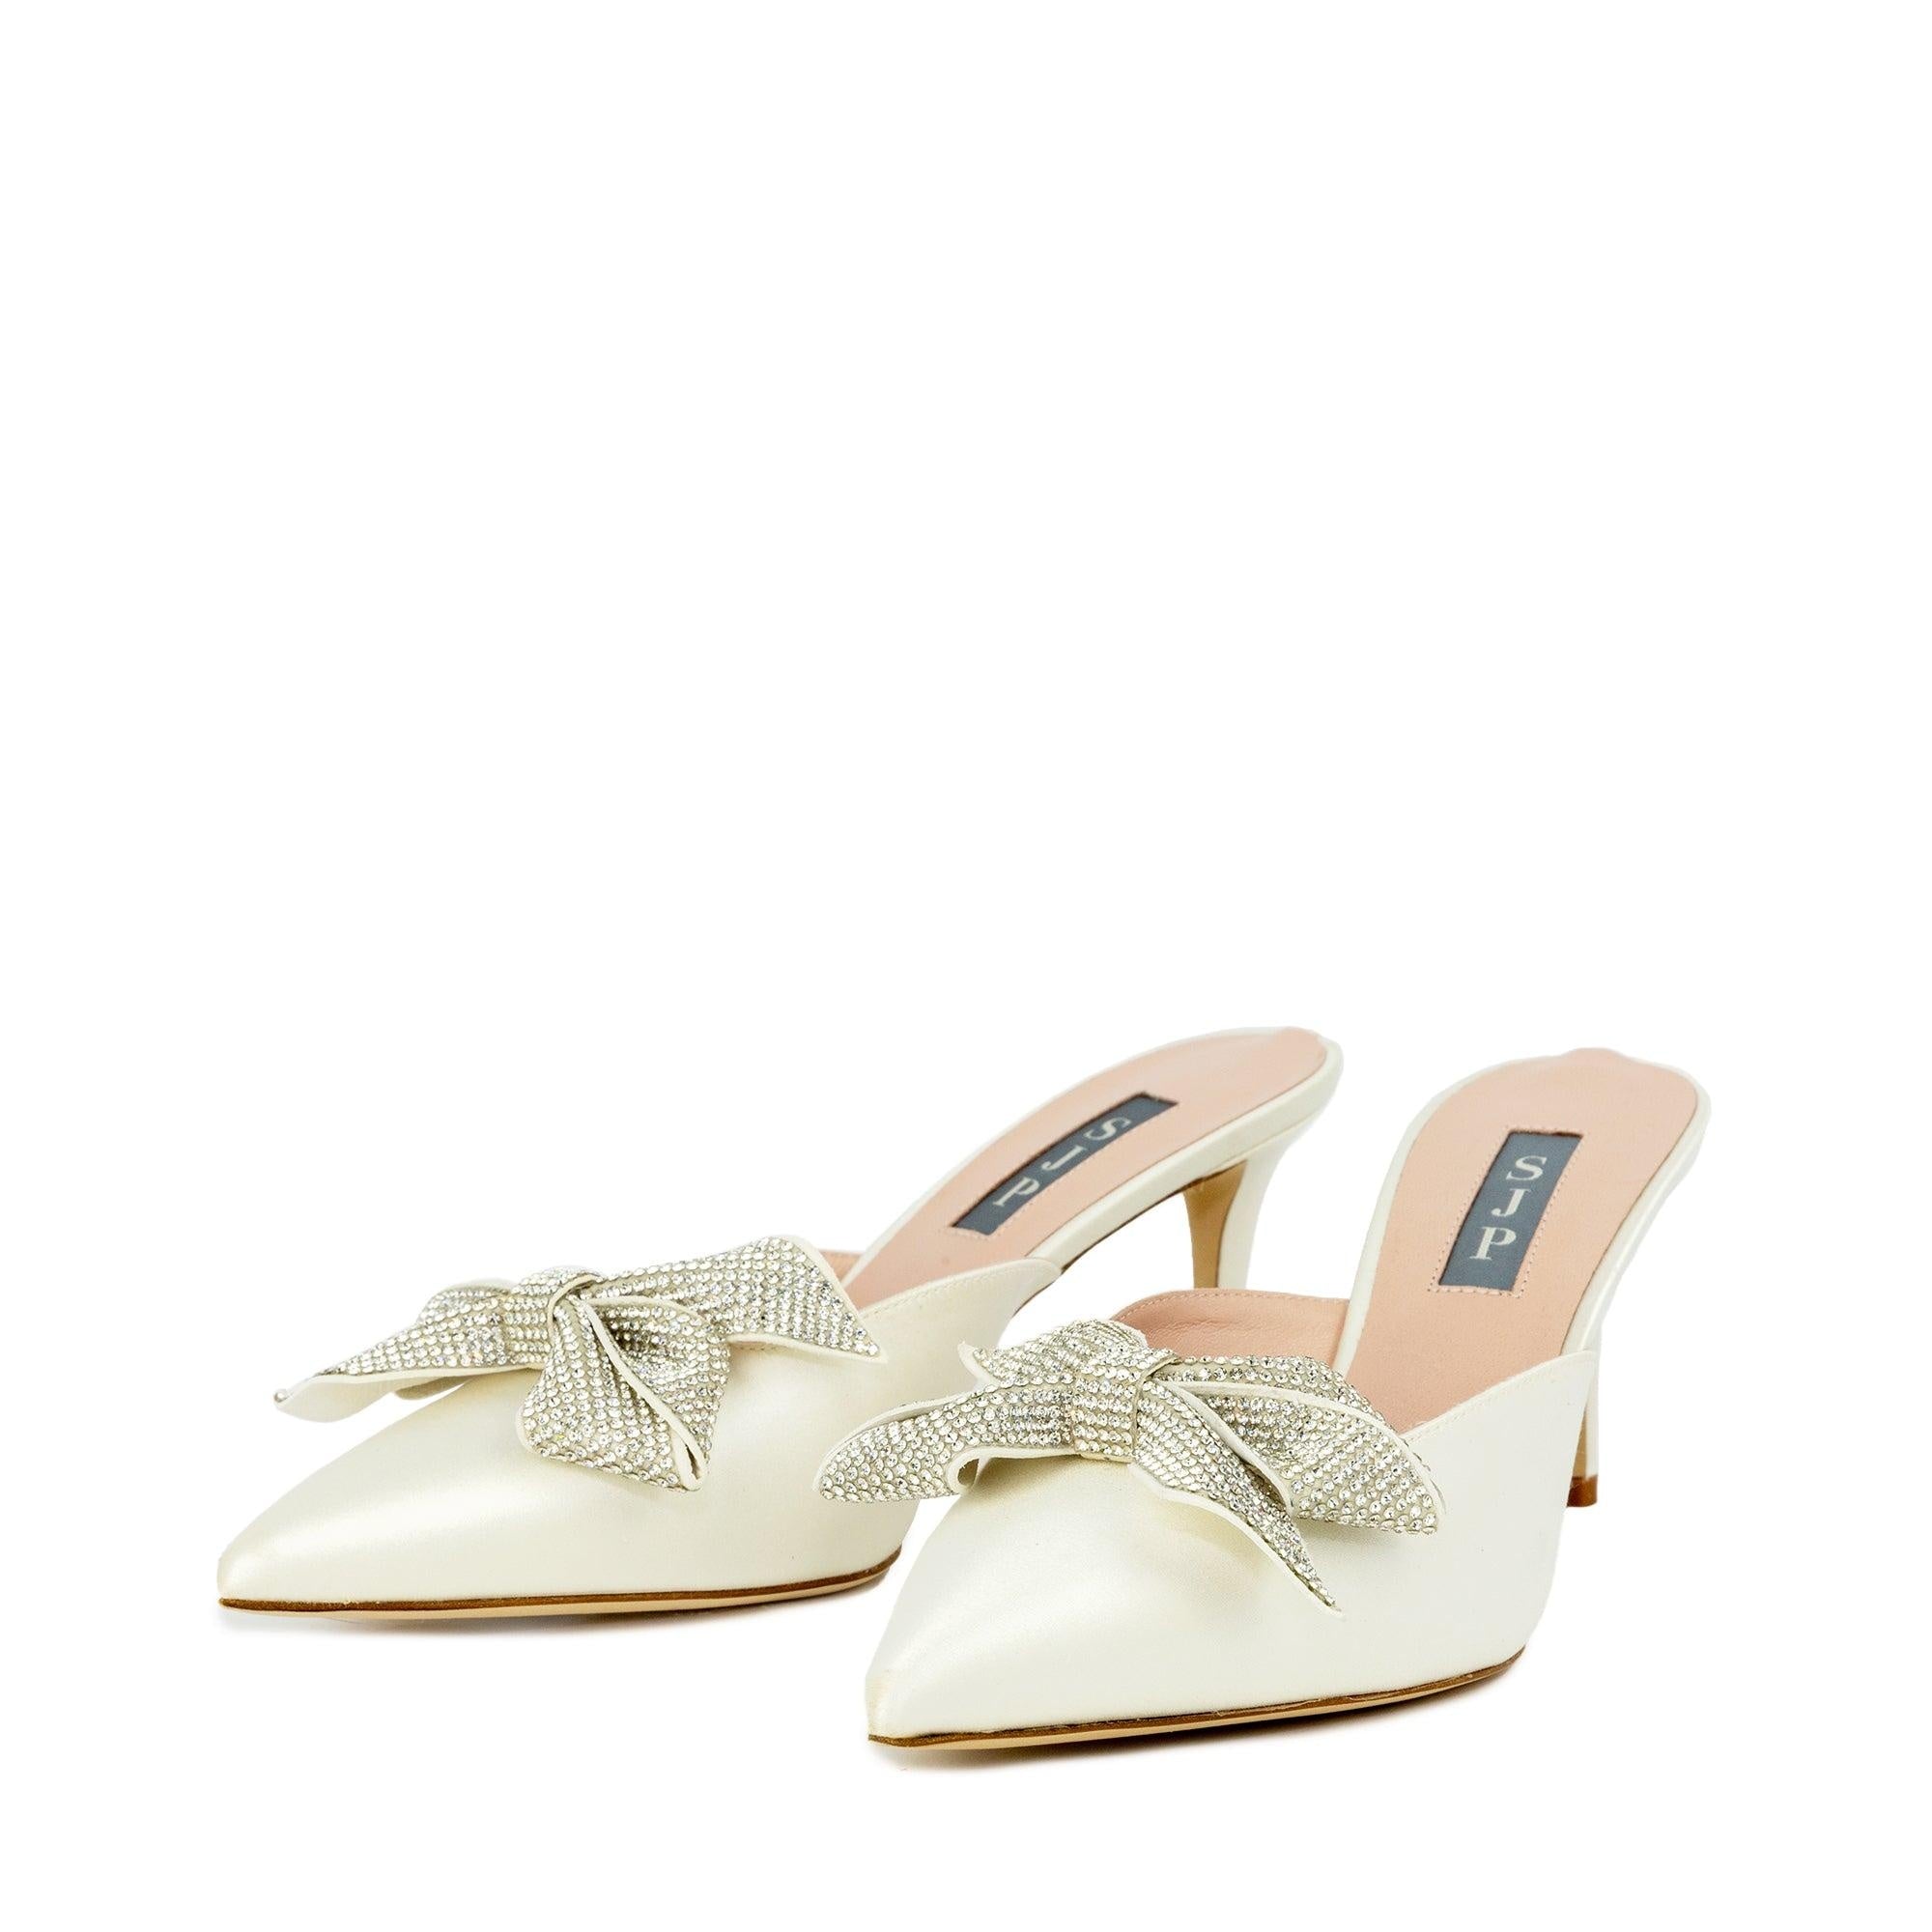 Buy SJP by Sarah Jessica Parker Paley Ivory Satin Mules 70mm Online